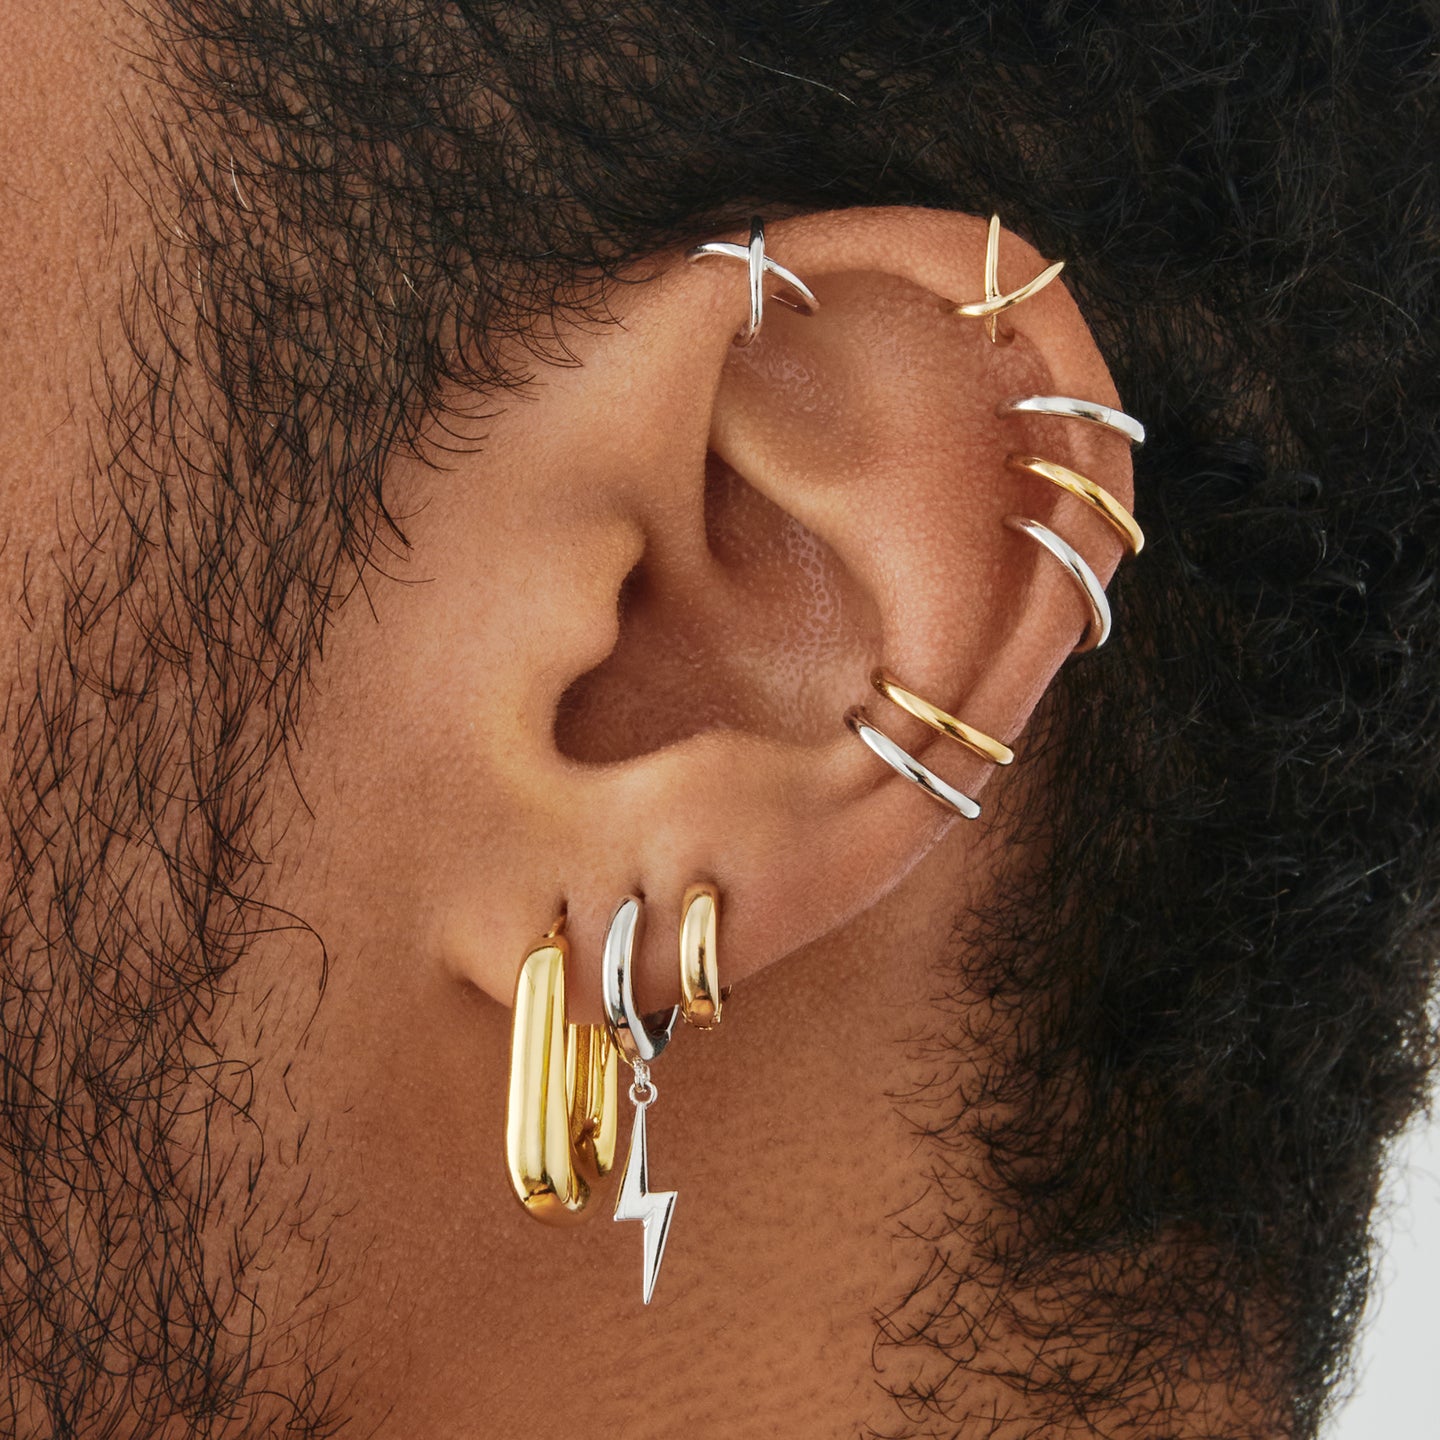 Slim gold ear cuff that requires no piercing. [hover] color:null|gold